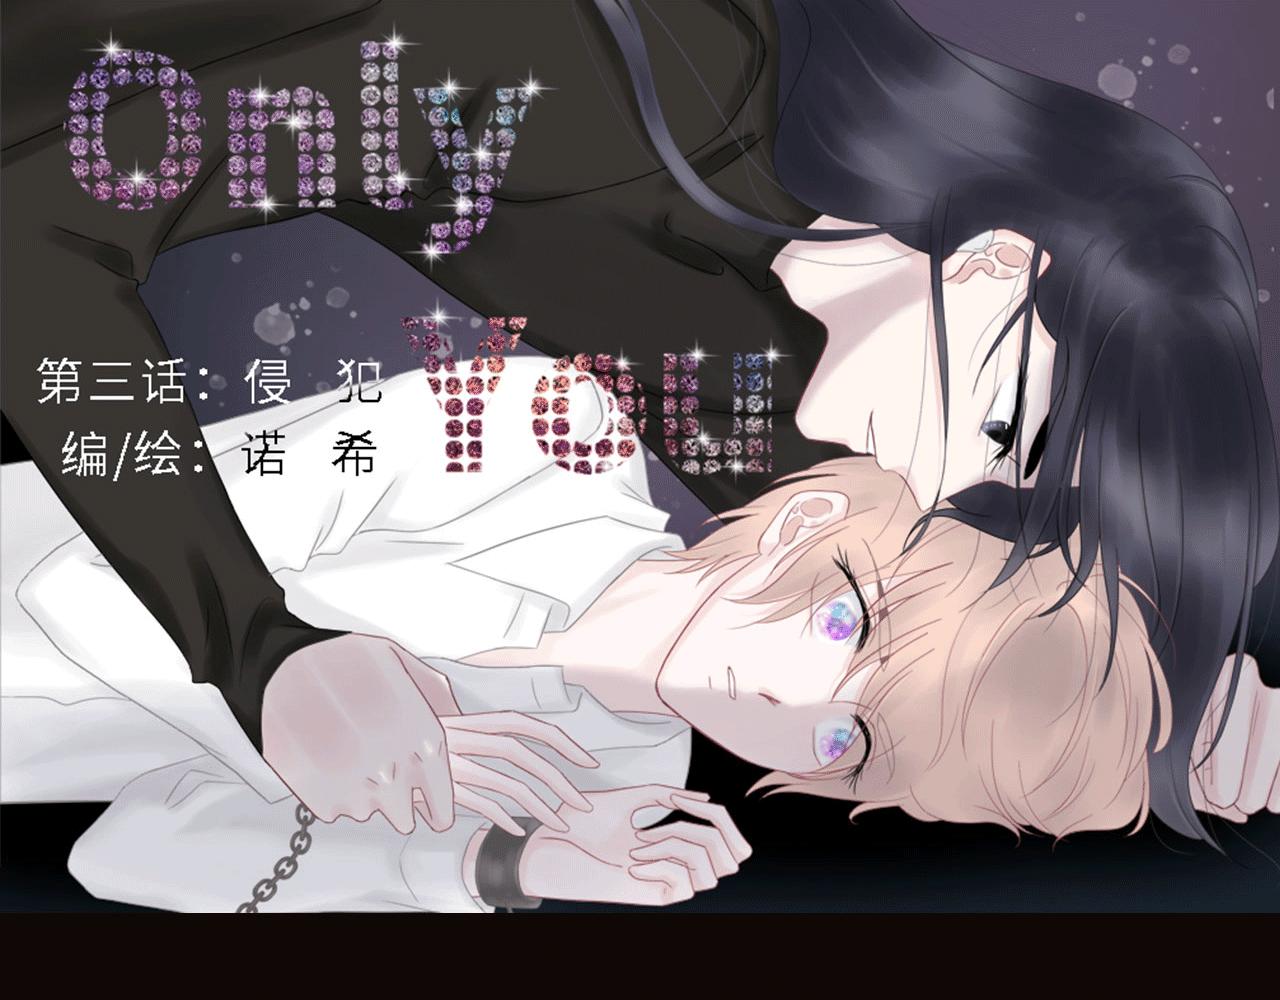 Only You - 第三話 侵犯(1/2) - 1